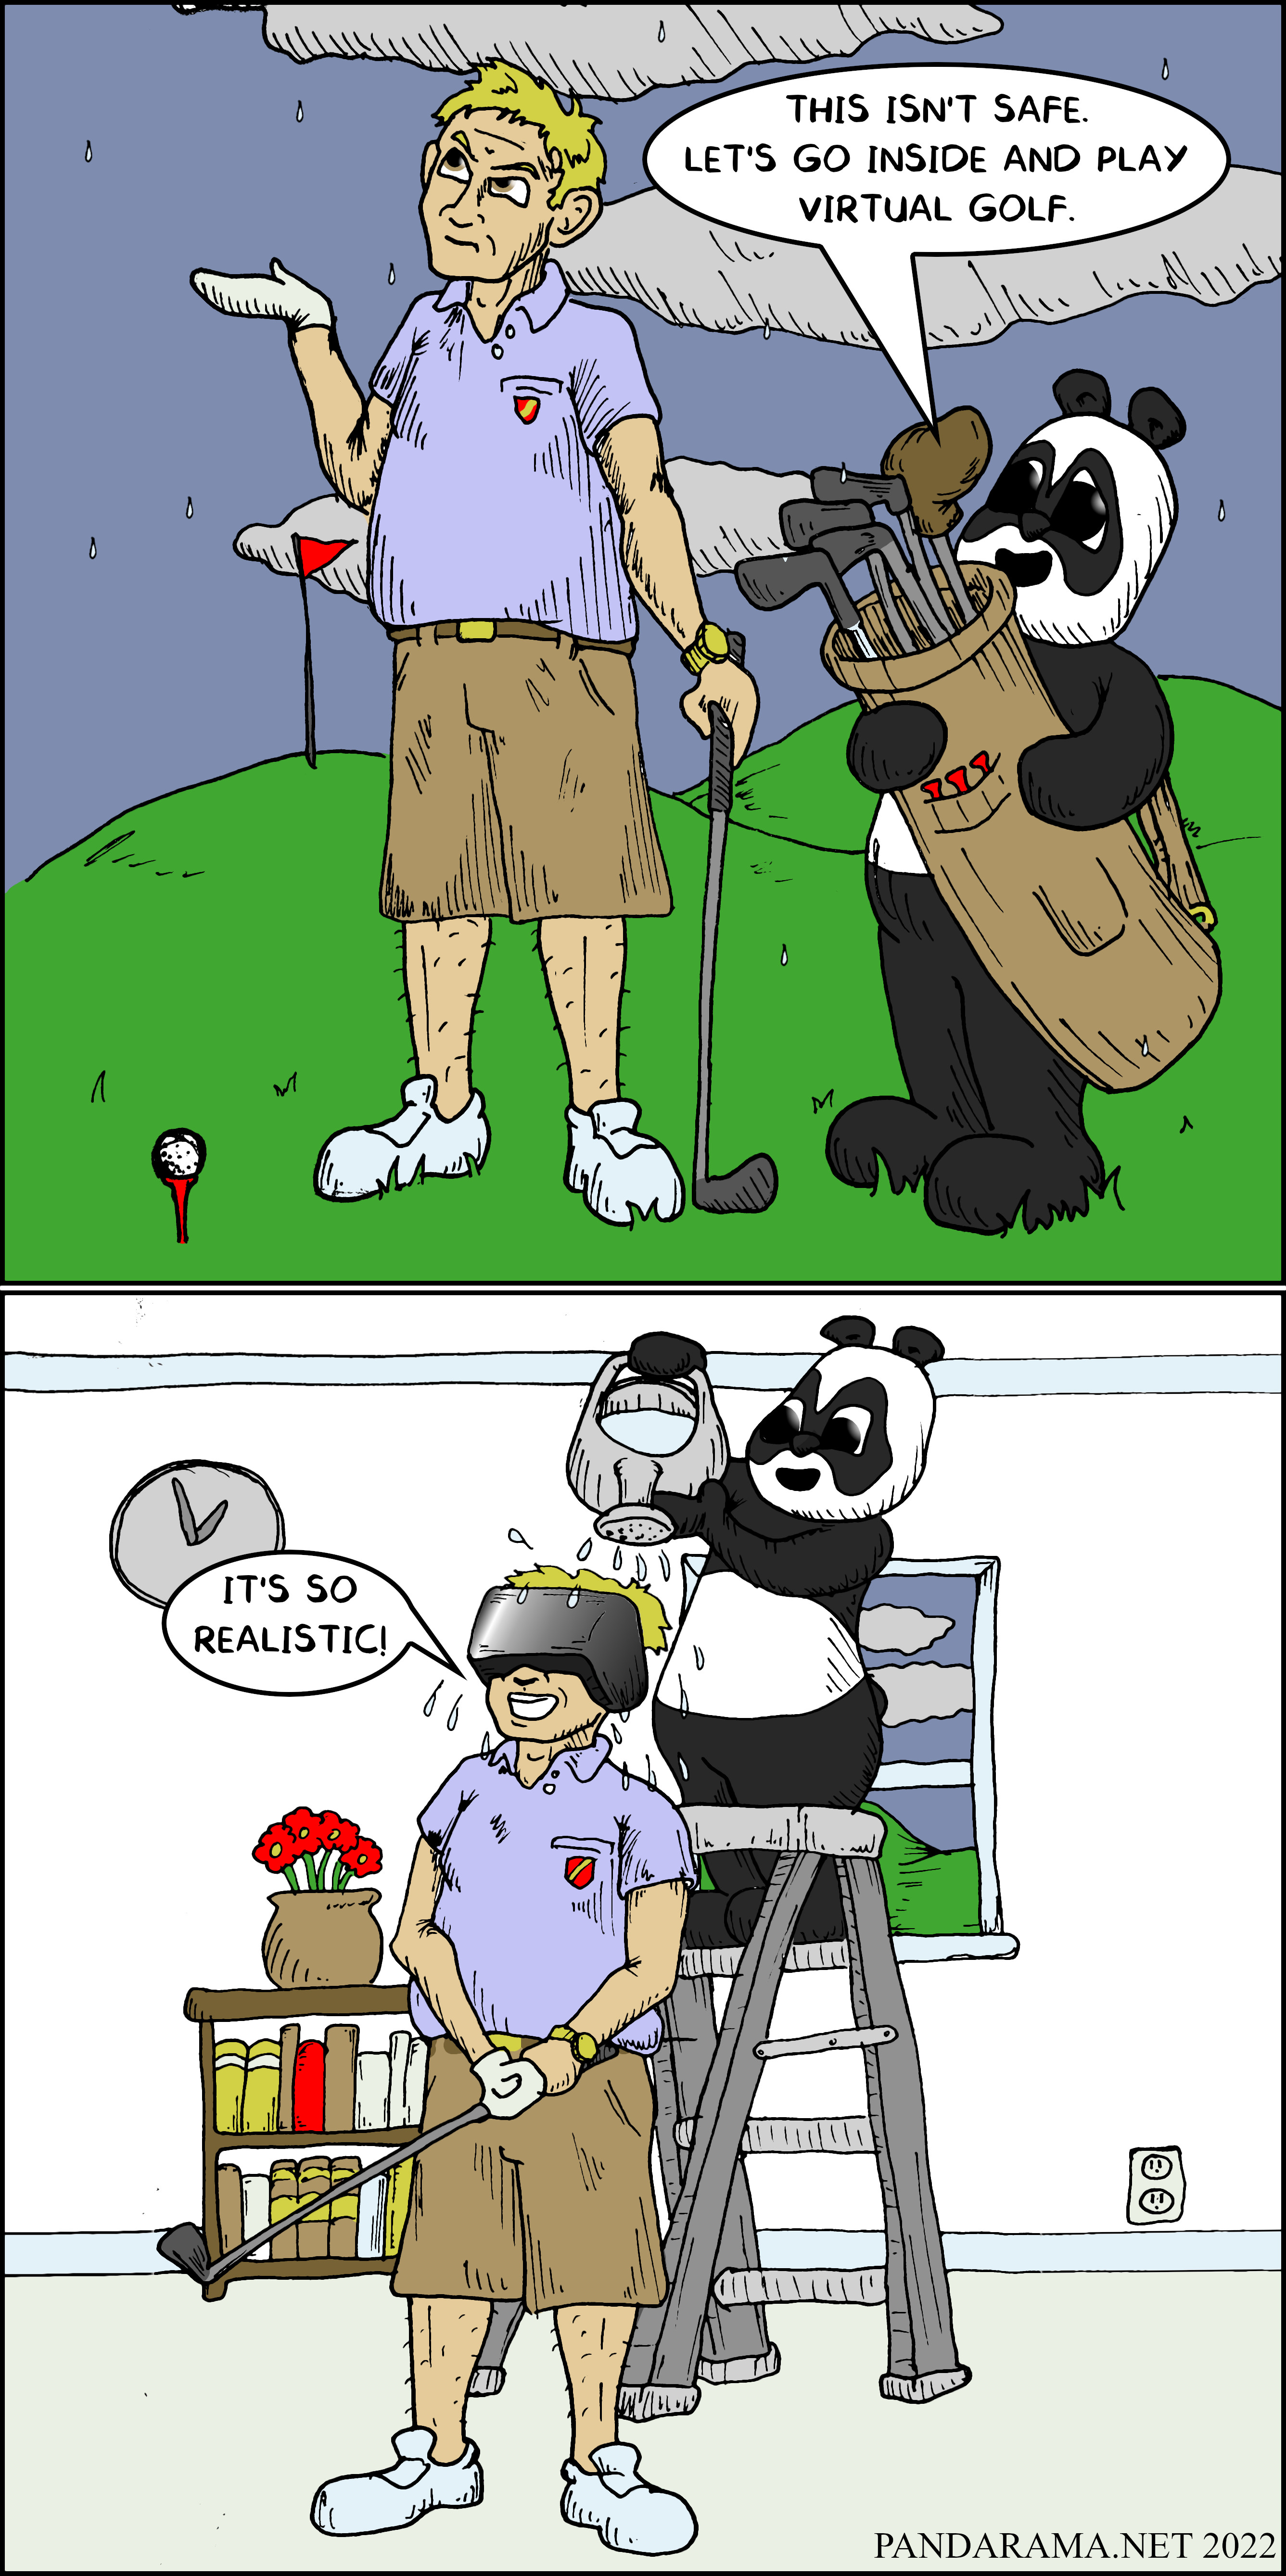 cartoon. too dangerous to golf outside in the rain, play virtual golf inside while panda pours water on golfer's head.